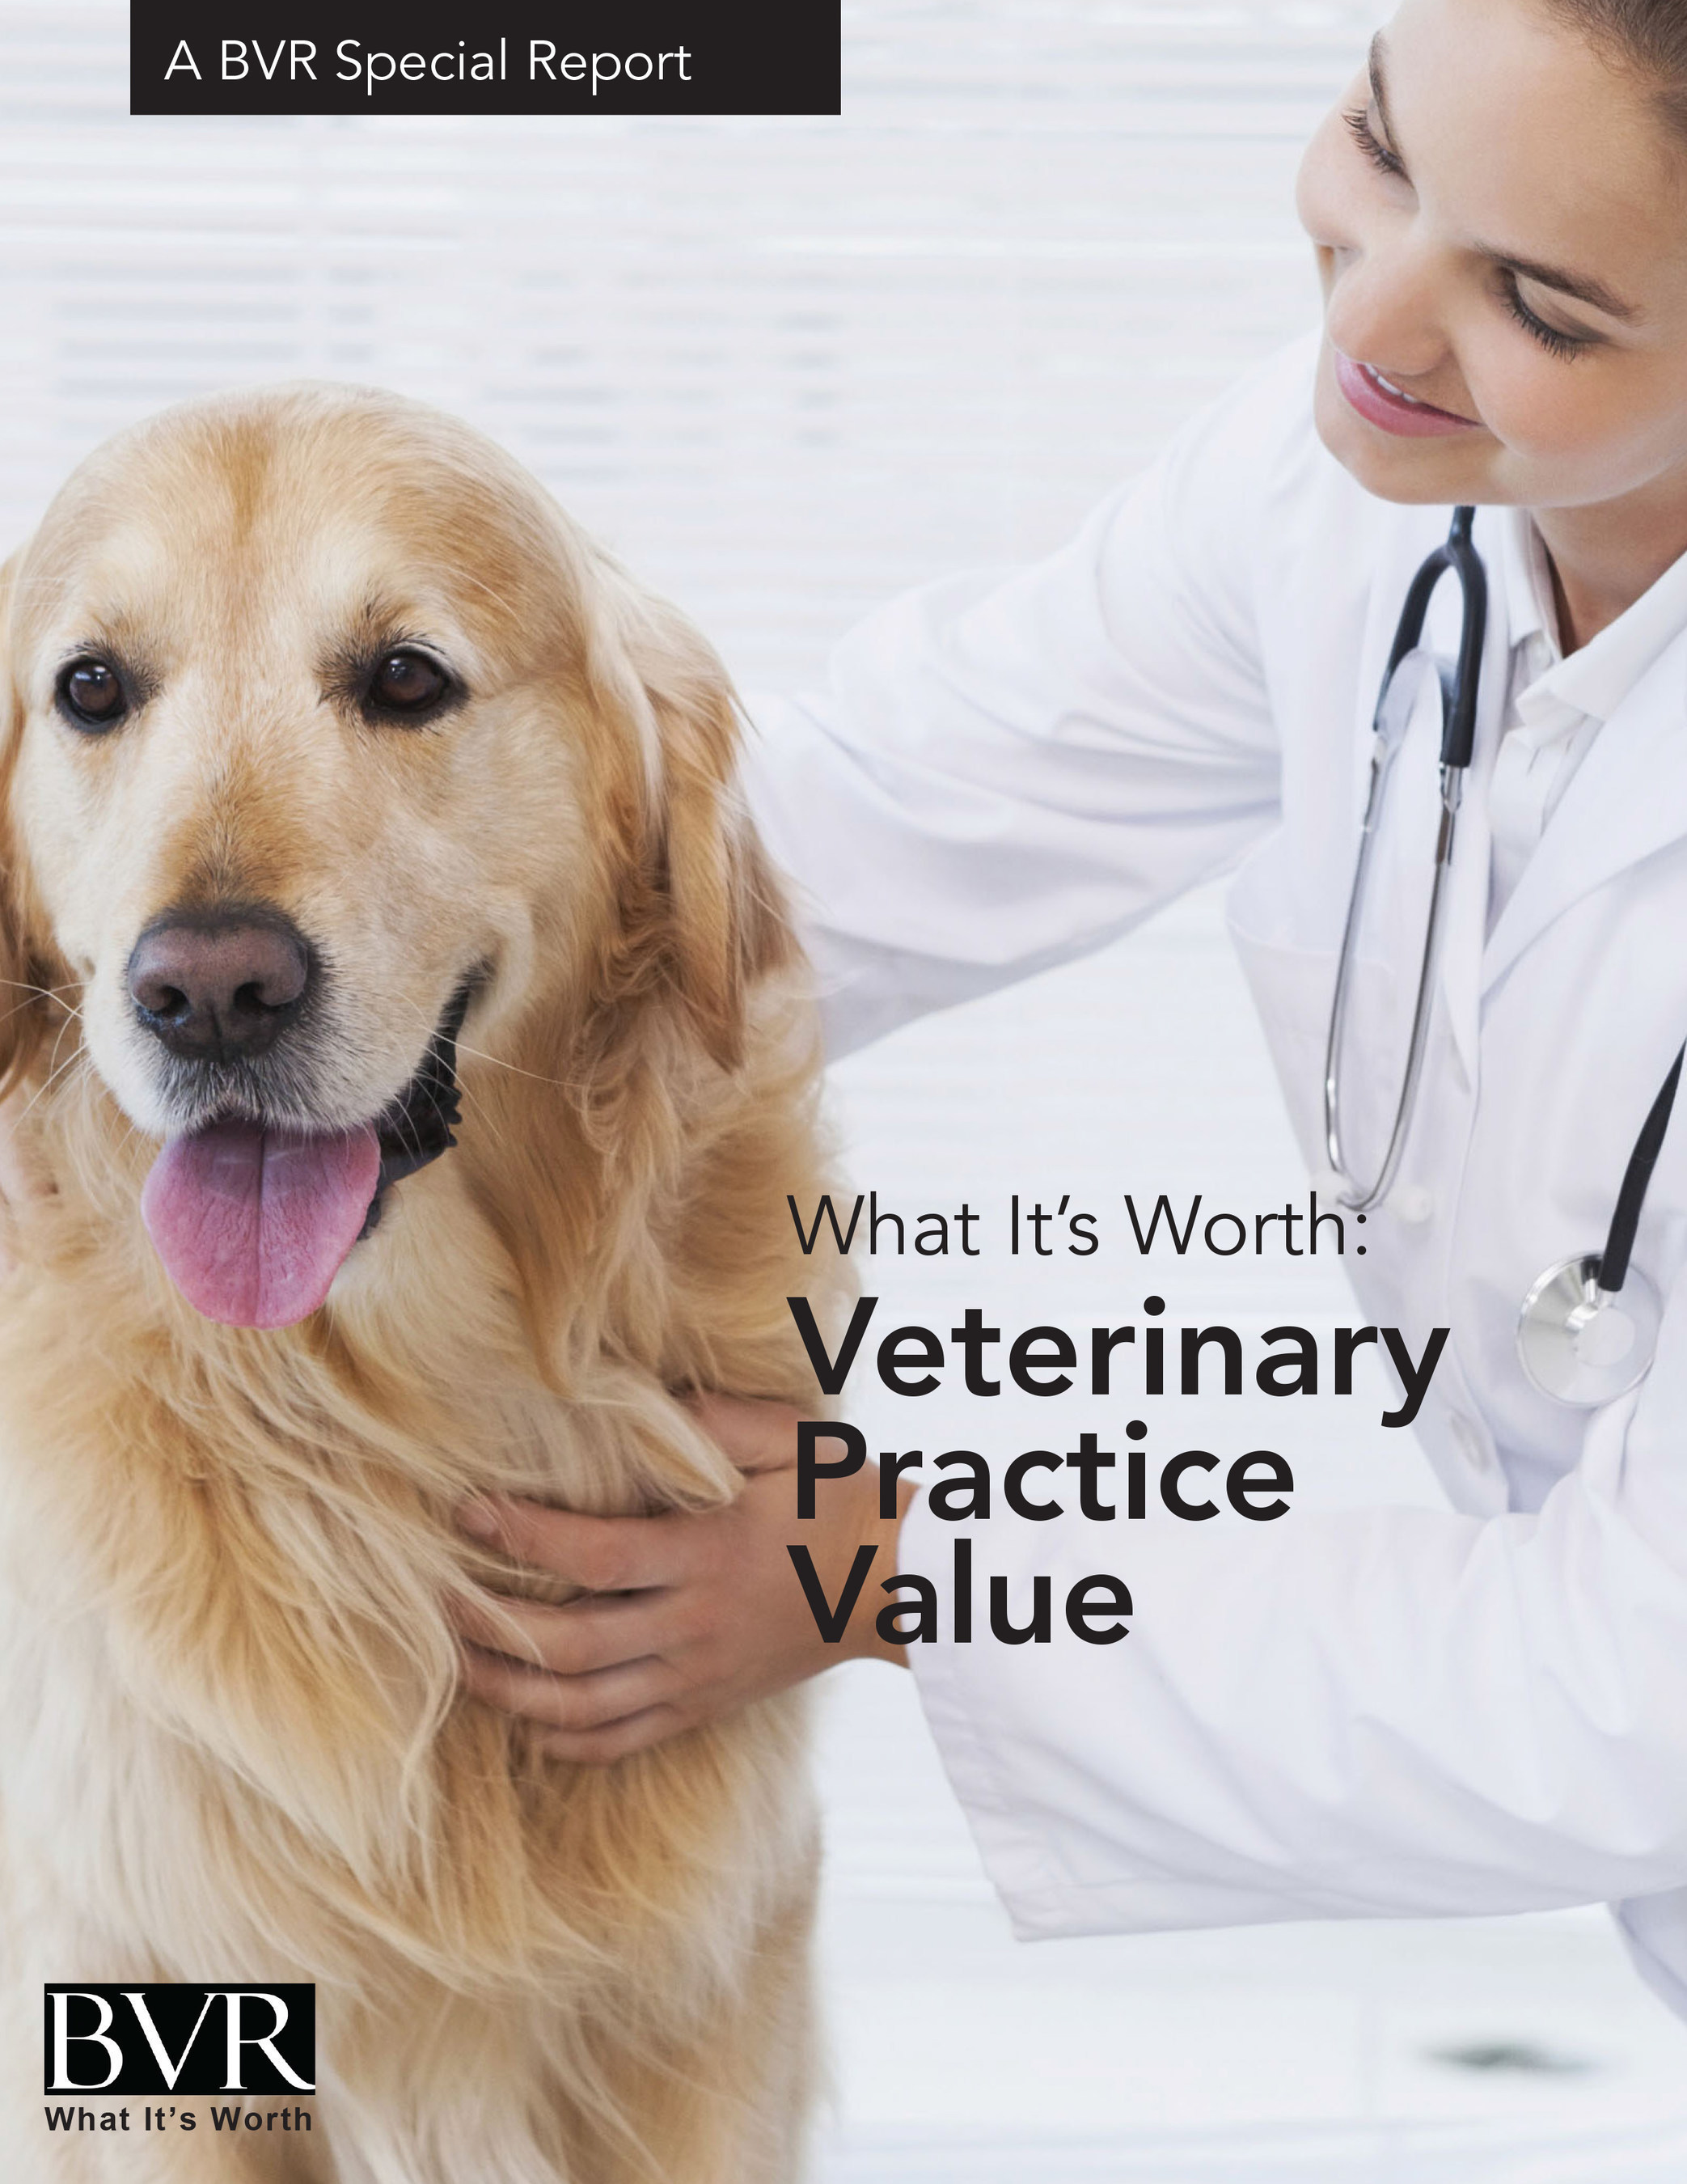 New special report now available: What It's Worth: Veterinary Practice Value